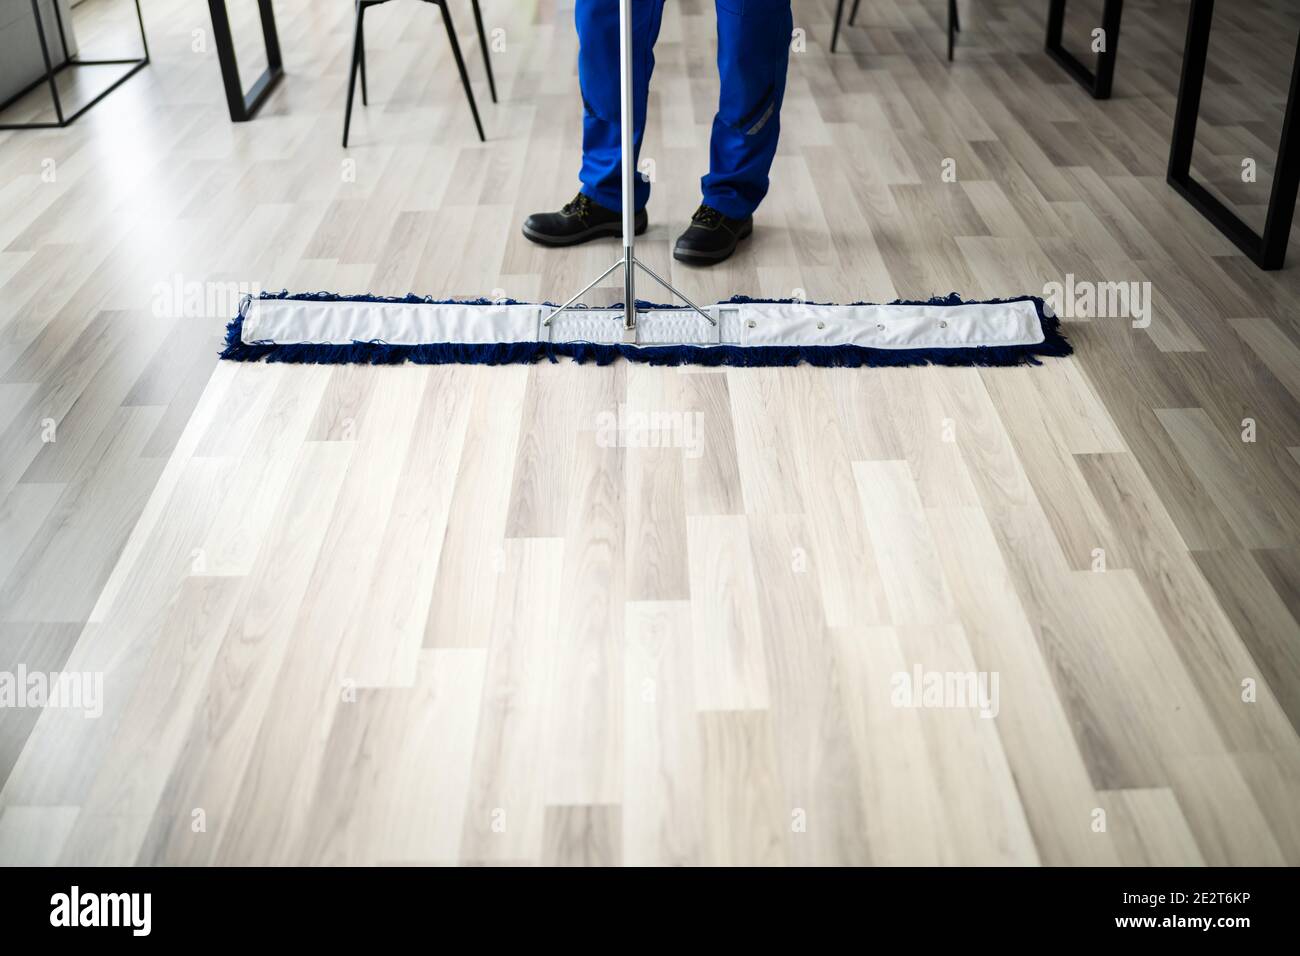 Male Janitor Mopping Floor In Face Mask In Office Stock Photo